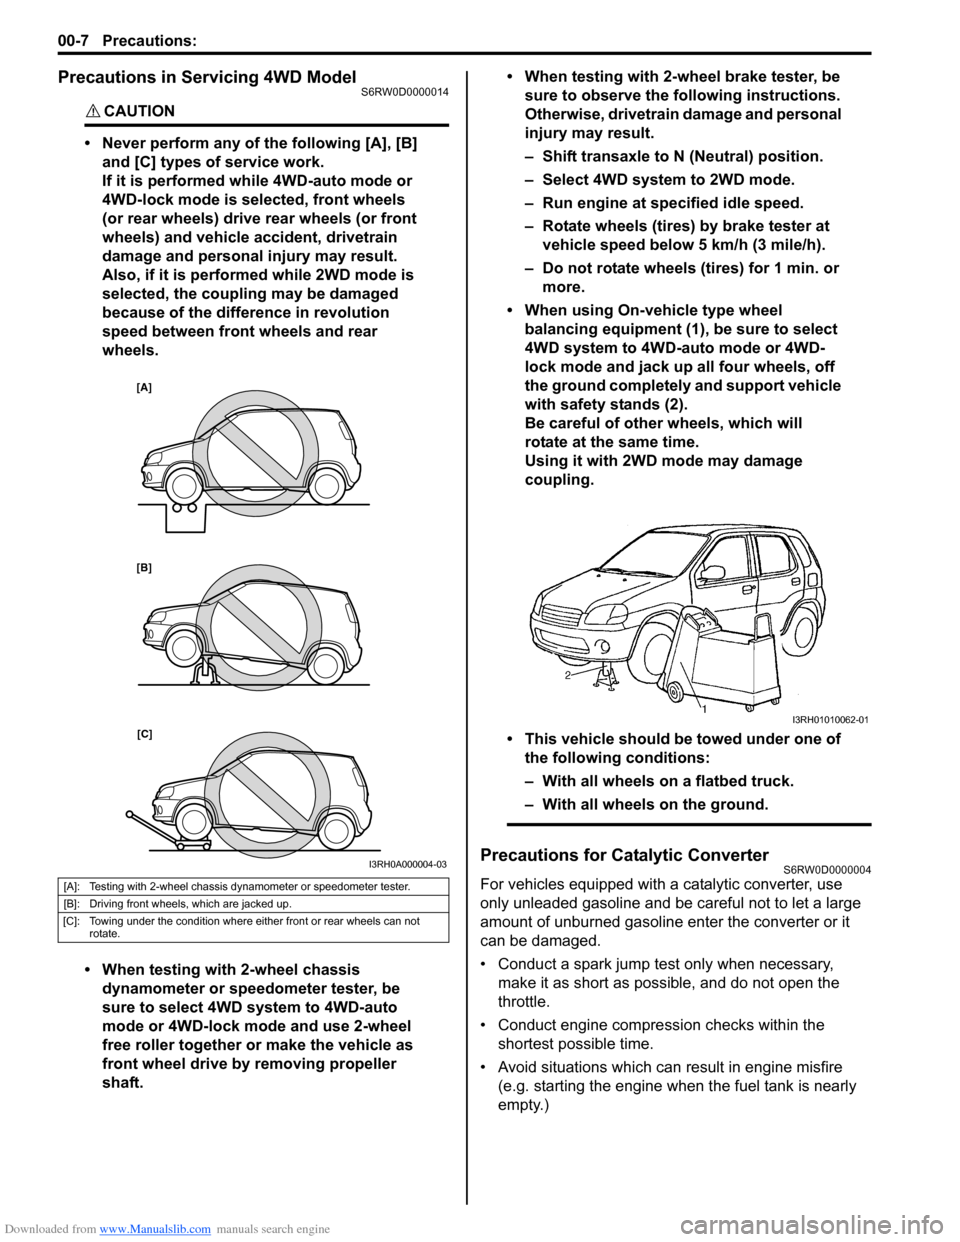 SUZUKI SX4 2006 1.G Service User Guide Downloaded from www.Manualslib.com manuals search engine 00-7 Precautions: 
Precautions in Servicing 4WD ModelS6RW0D0000014
CAUTION! 
• Never perform any of the following [A], [B] 
and [C] types of 